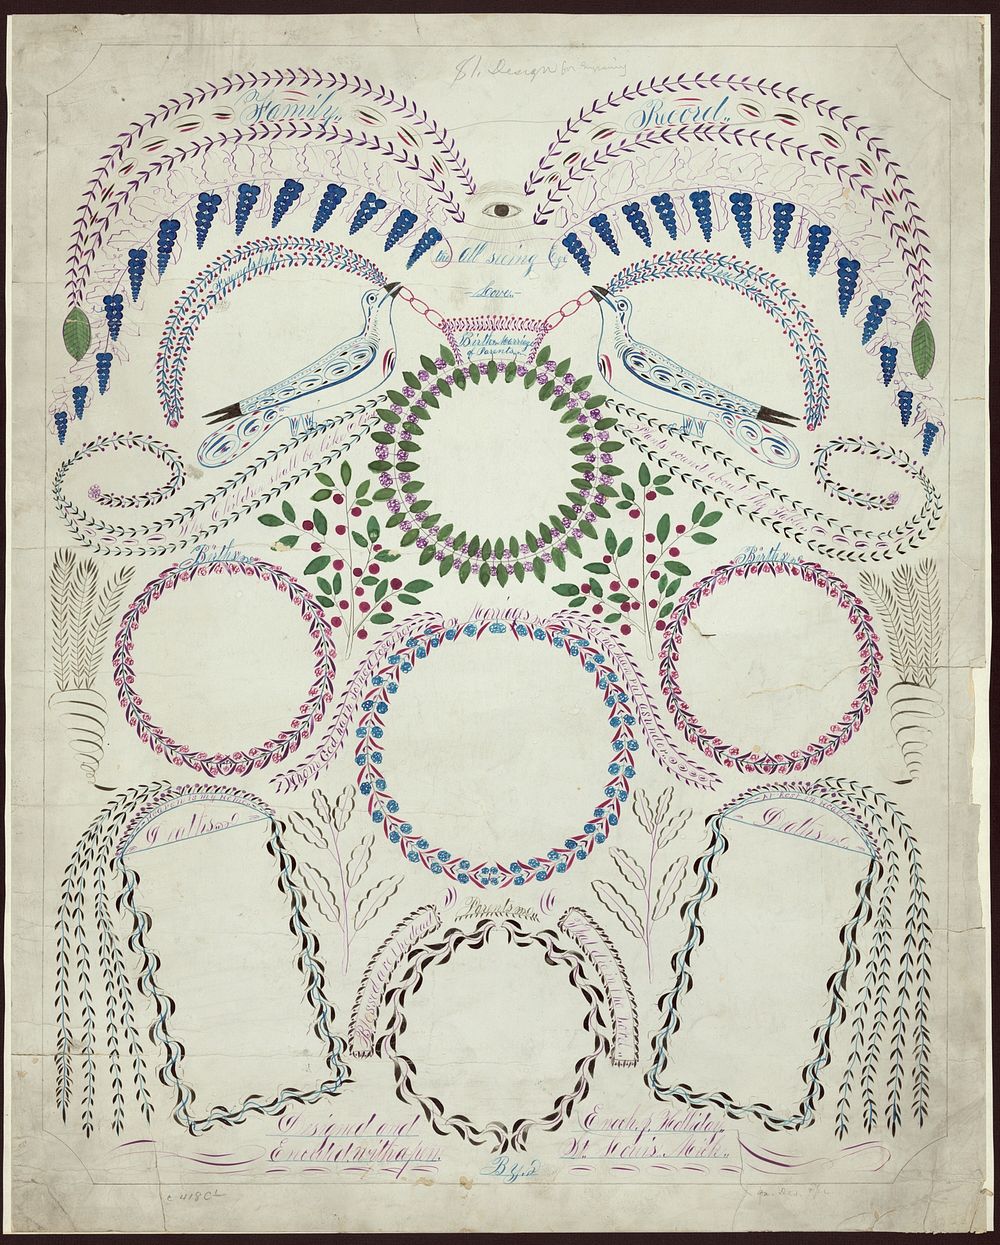 Design for engraving (1870). Original from the Library of Congress.